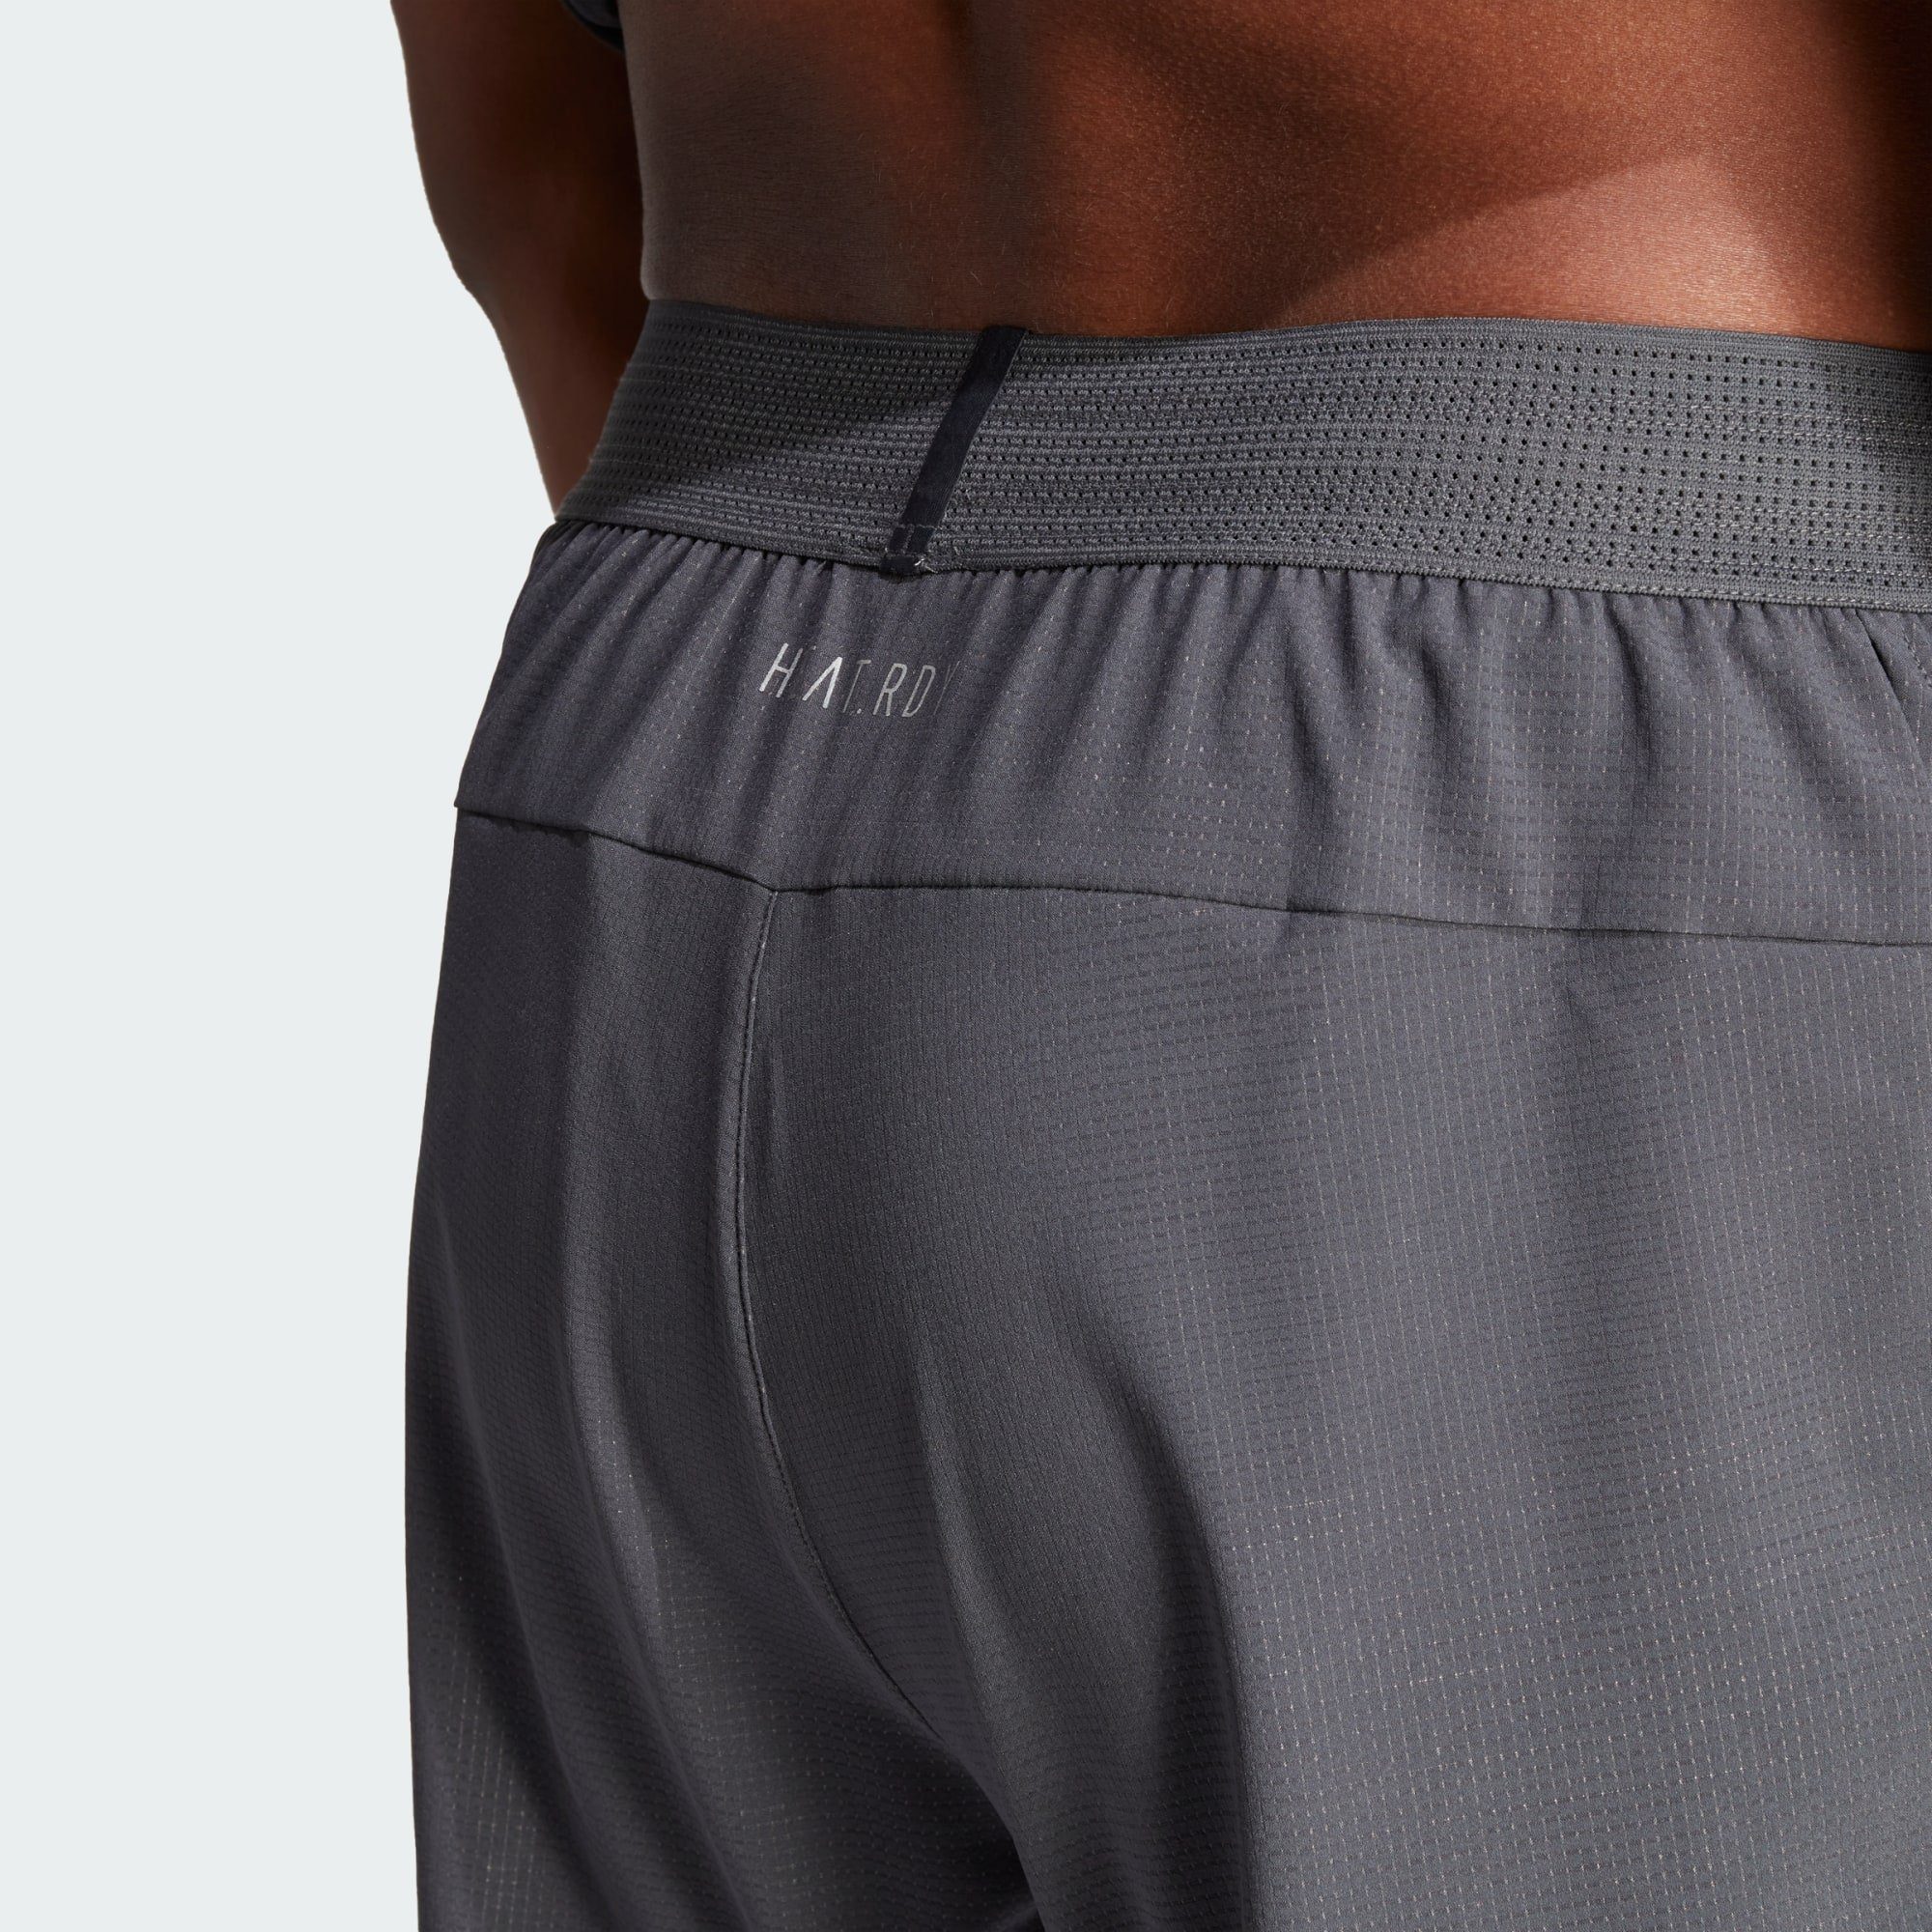 2-IN-1 Performance adidas Grey Six TRAINING SHORTS 2-in-1-Shorts HIIT ELEVATED HEAT.RDY